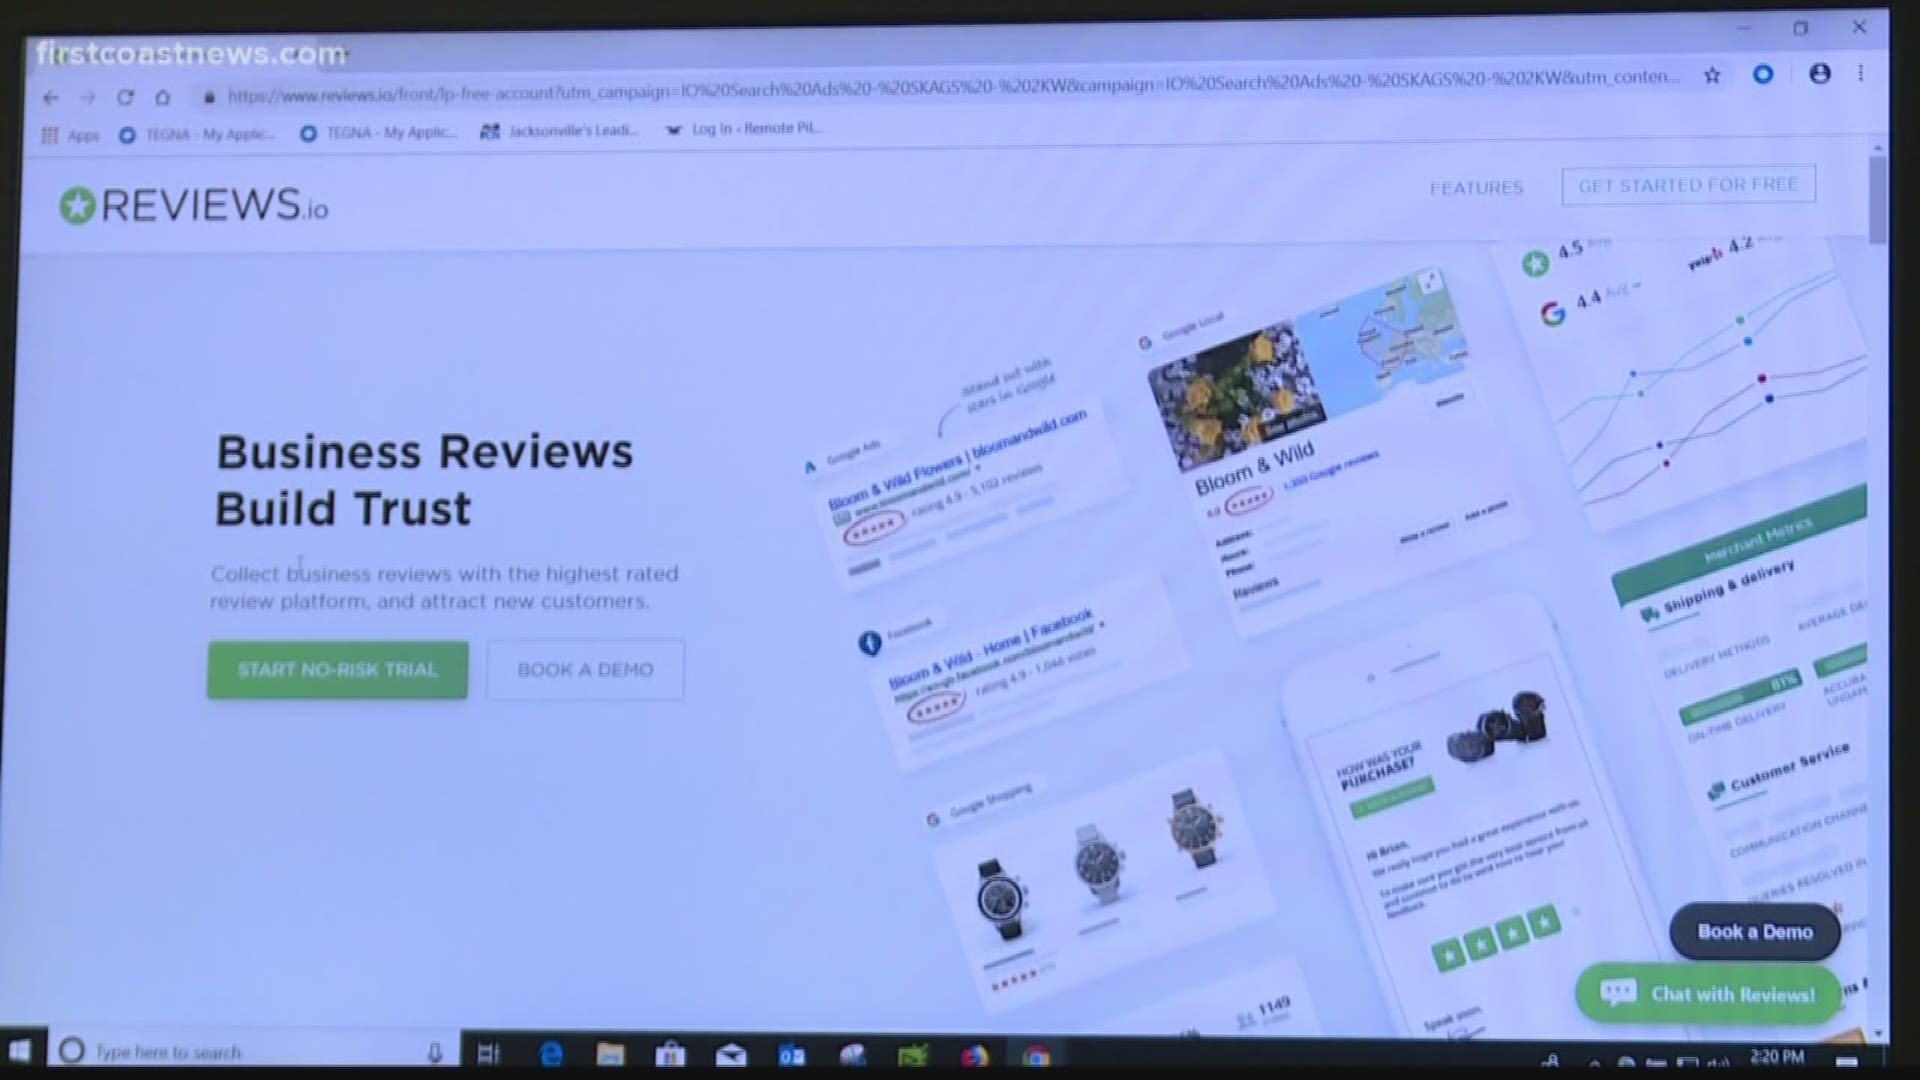 One Jacksonville attorney says his business' website has been targeted with negative online reviews. He believes it's a competitor.